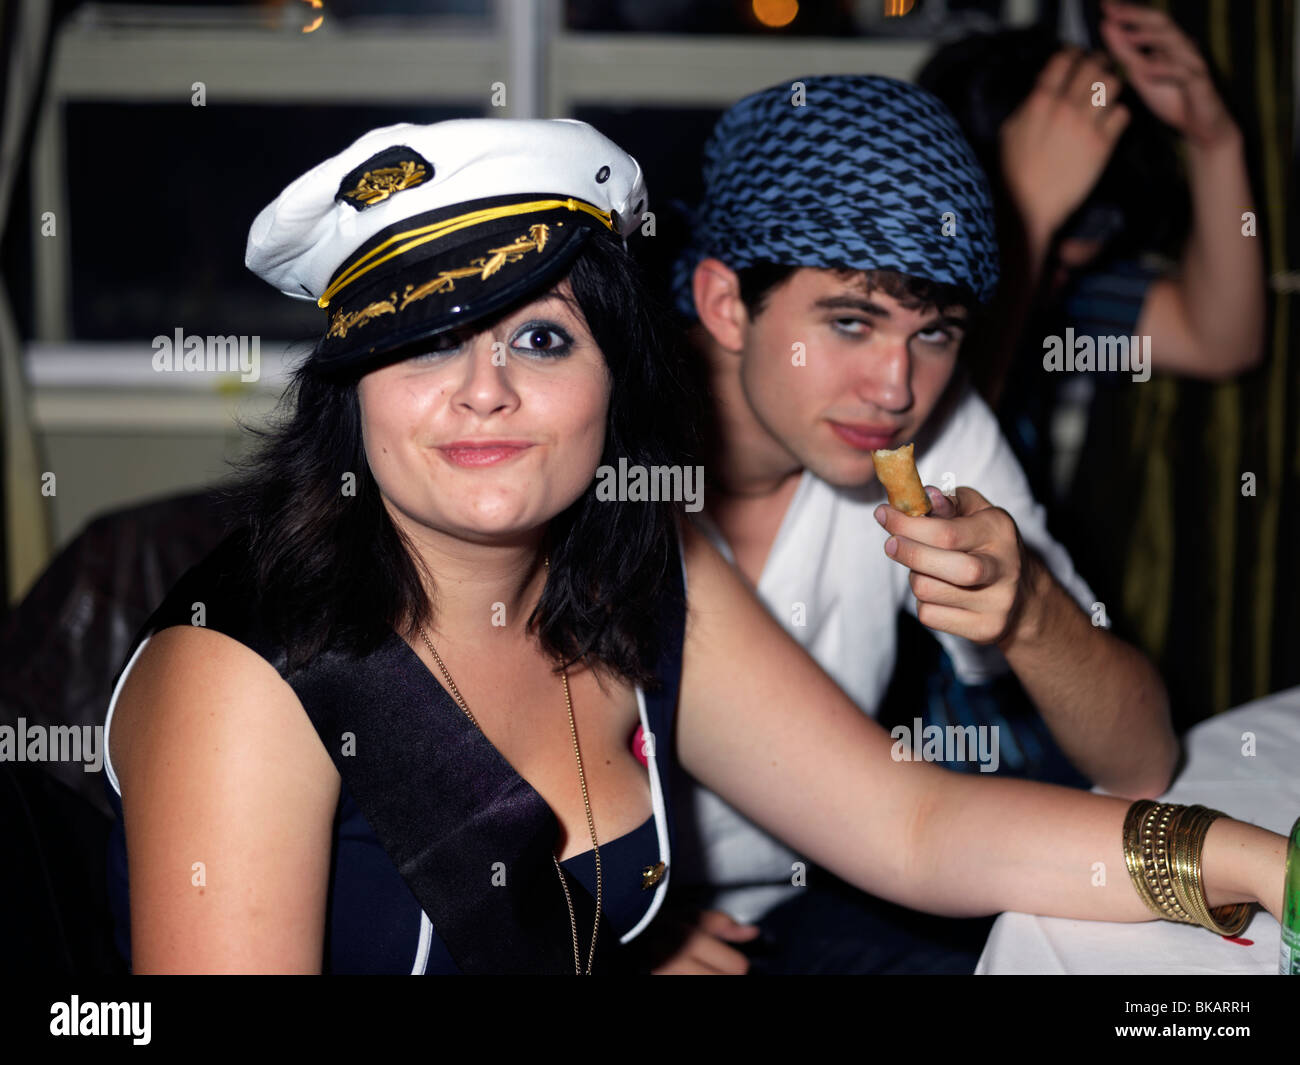 Eighteenth Birthday Party Teenagers In Fancy Dress Sailor And Pirate